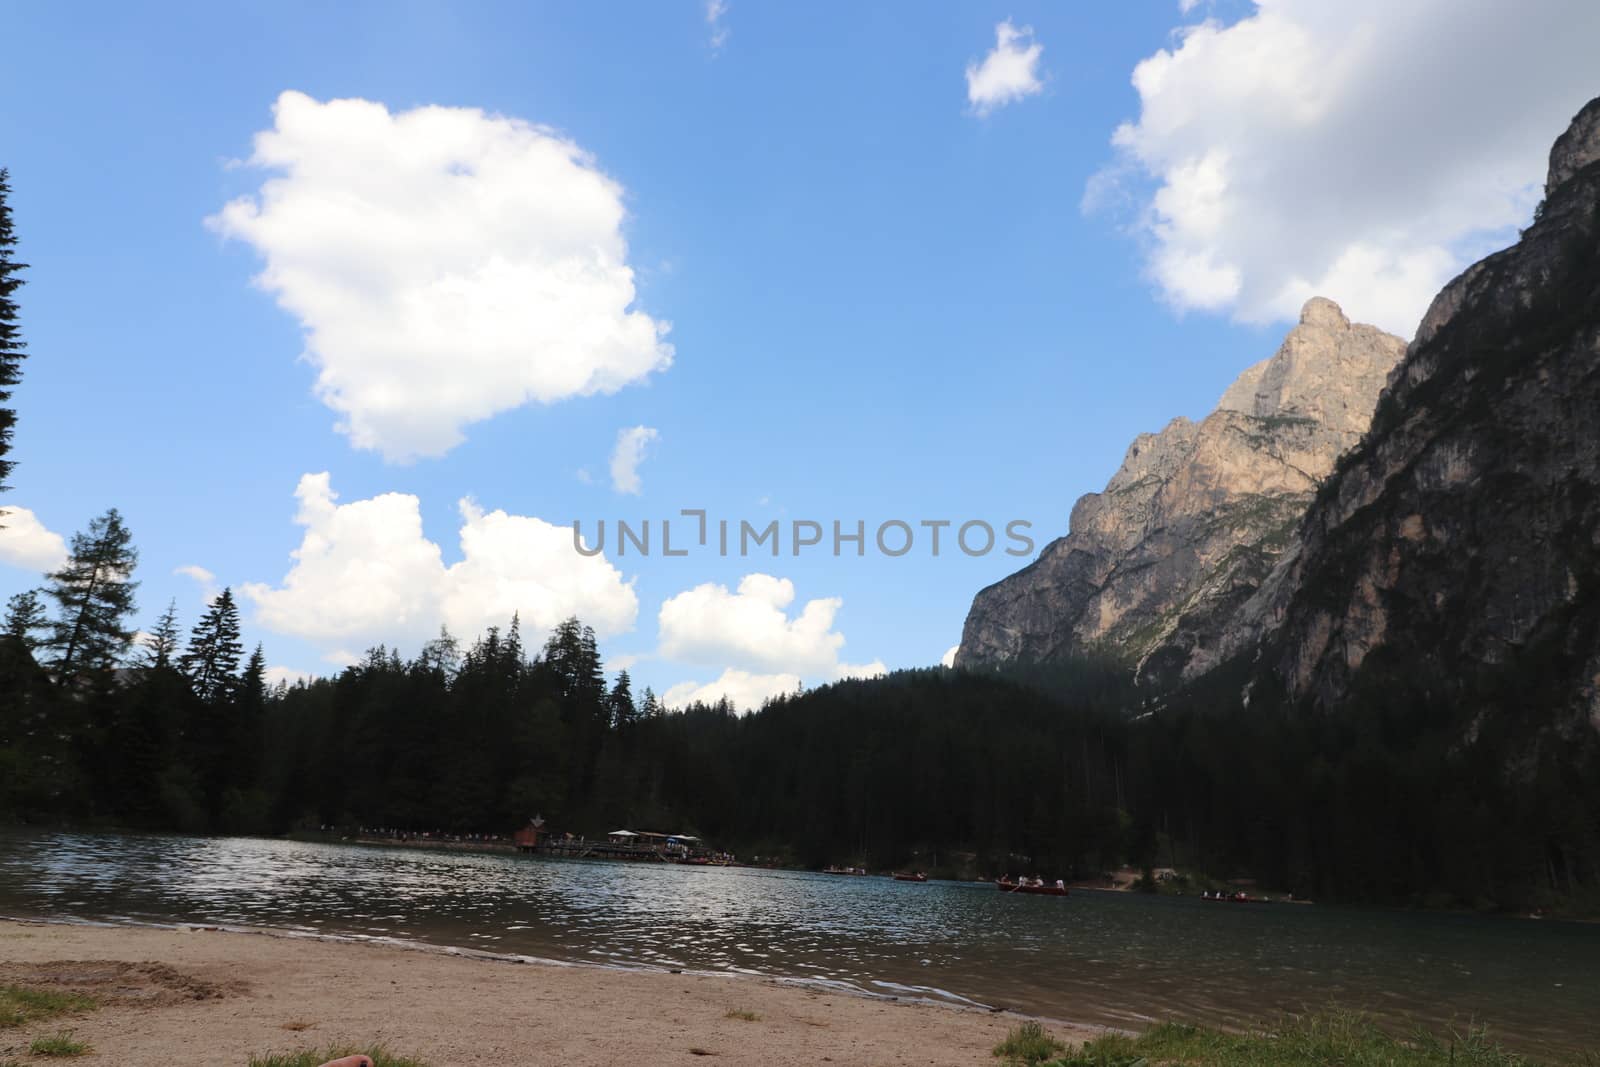 Braies lake at summer. Largest natural lake in Dolomites, South Tyrol, Italy, Europe. Beauty of nature background.